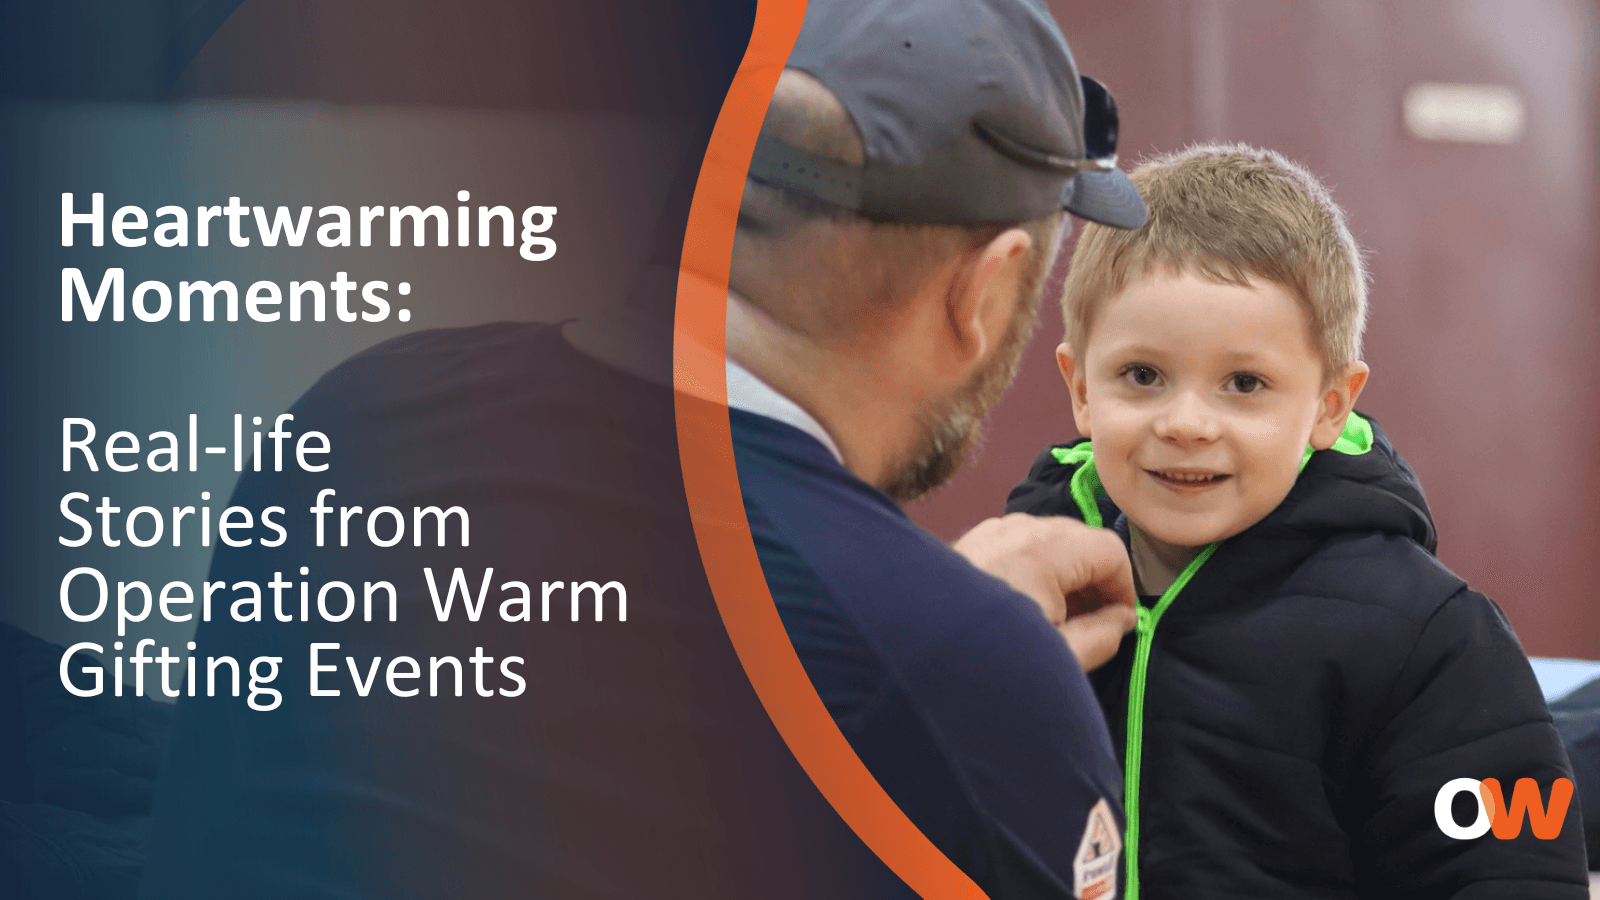 Heartwarming Moments: Real-life Stories from Operation Warm Gifting Events 